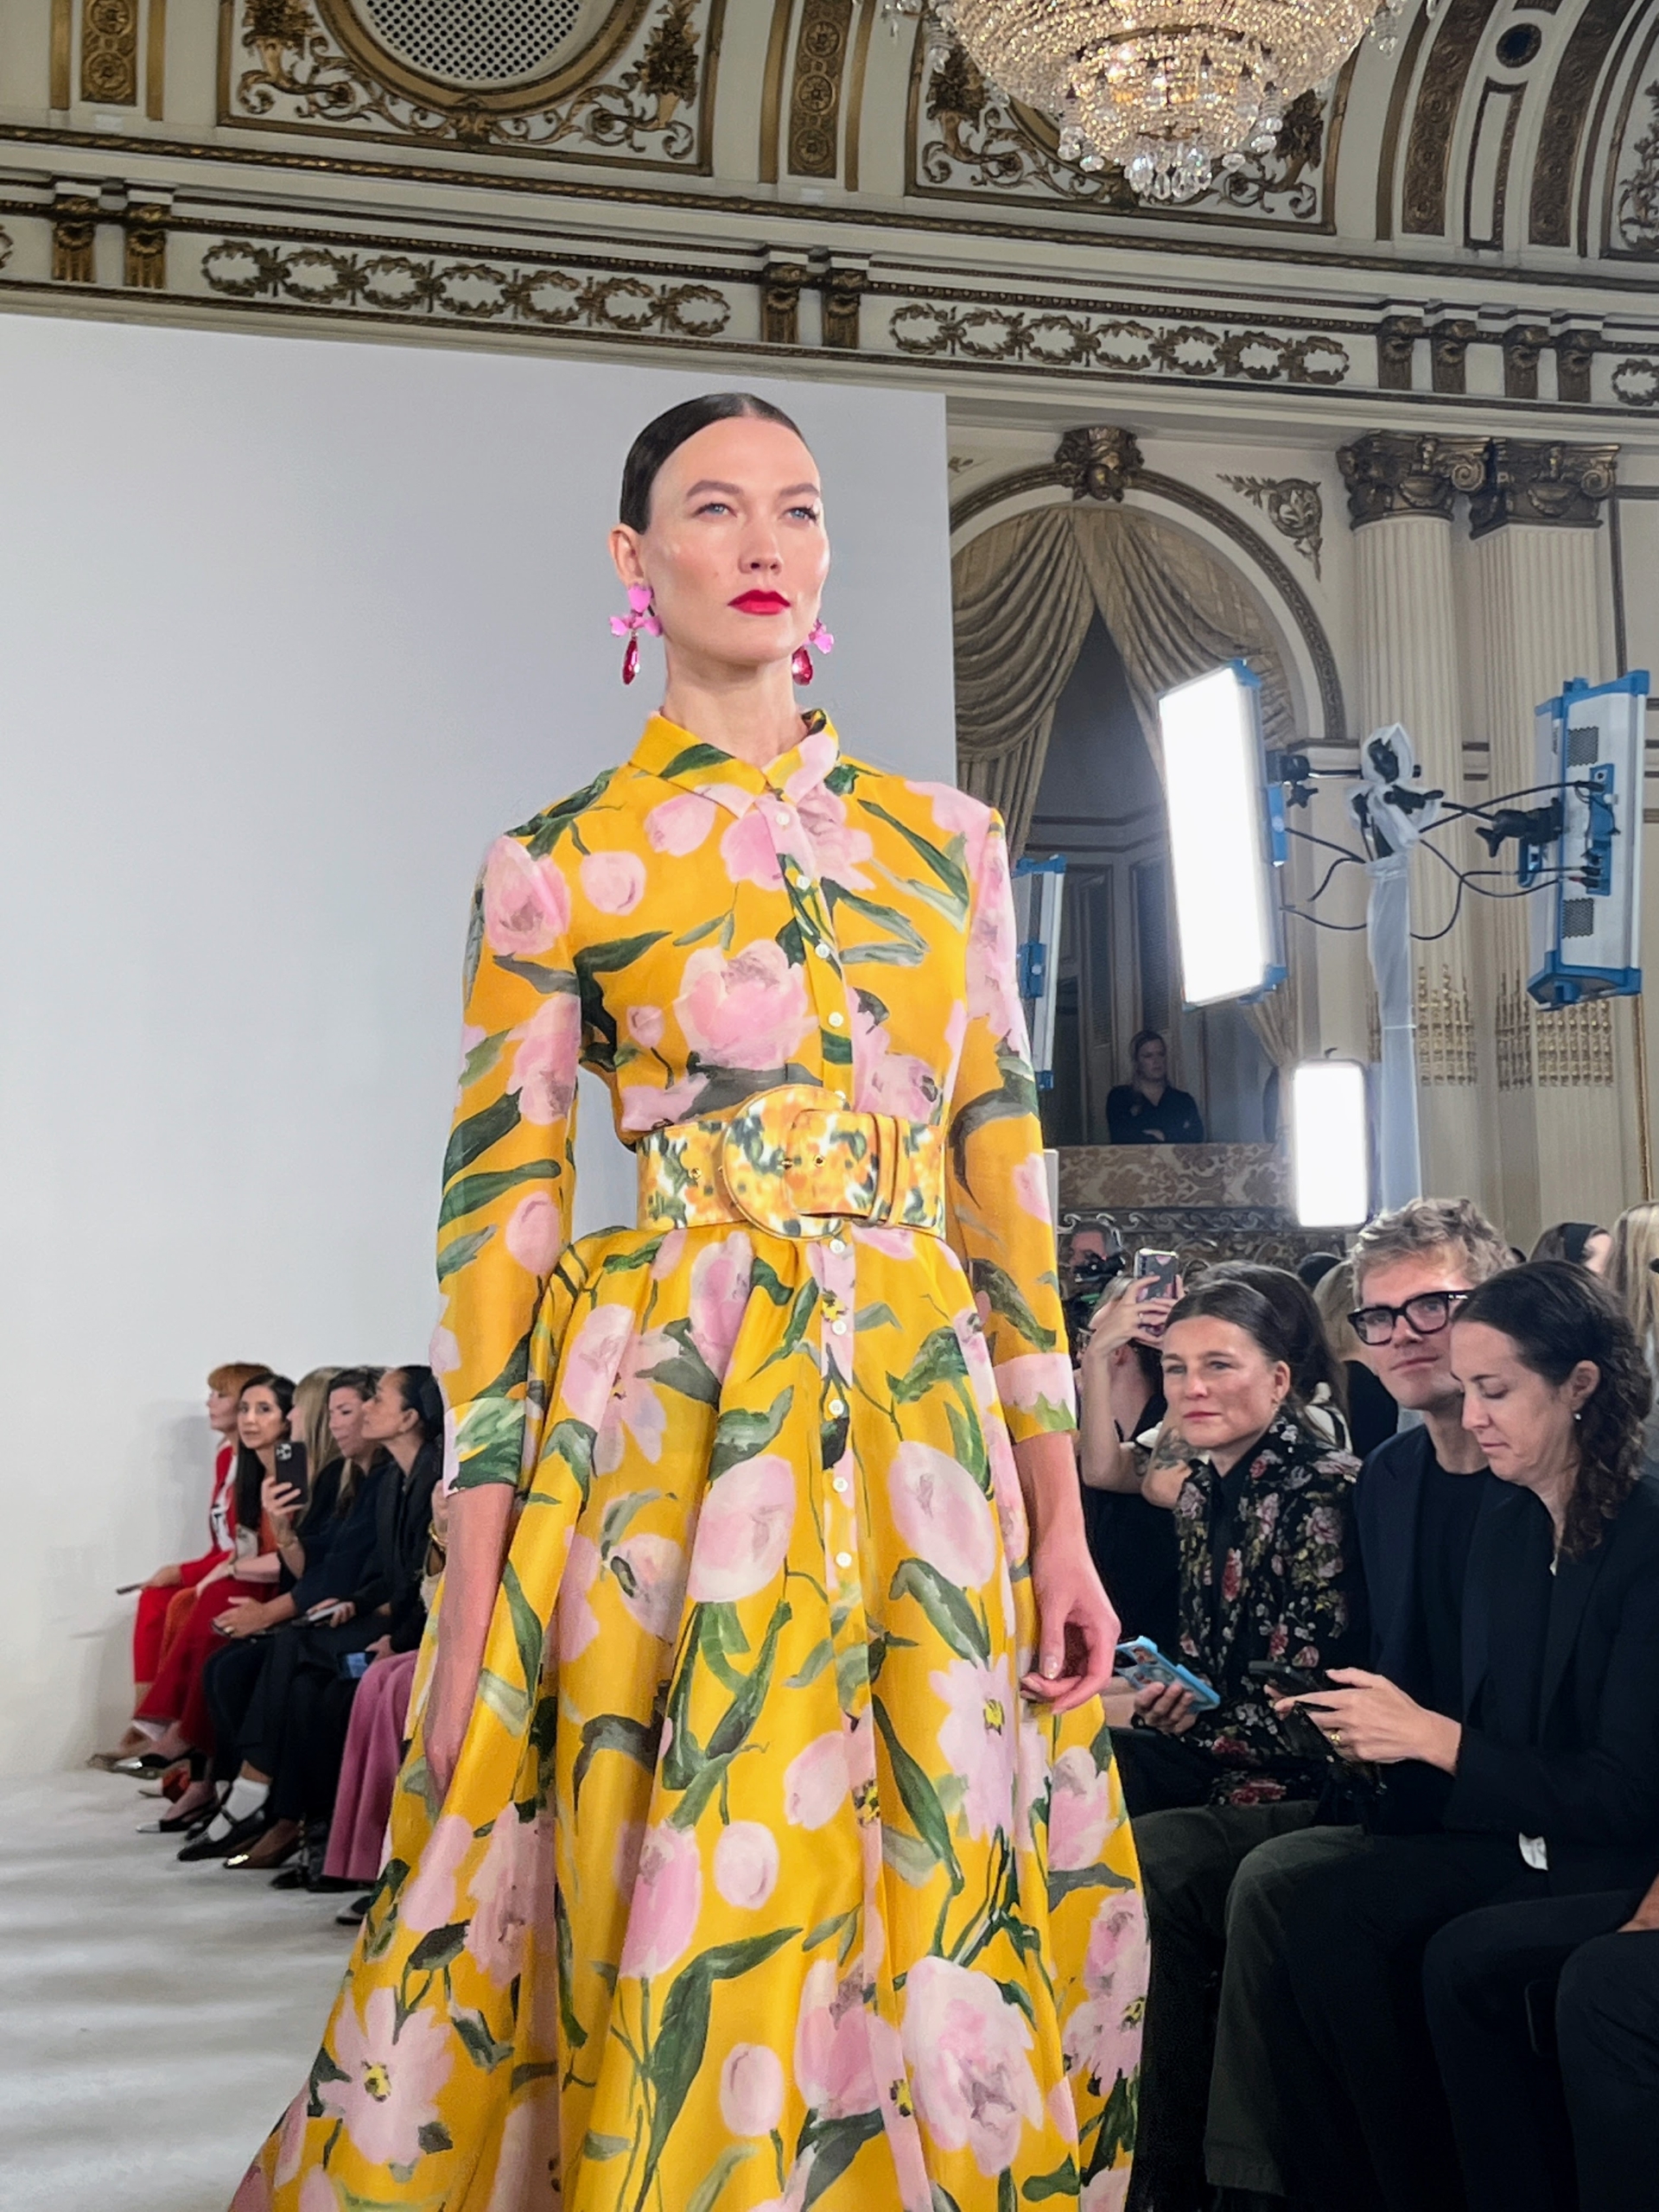 What To Expect at New York Fashion Week 2022 - Yamron Jewelers